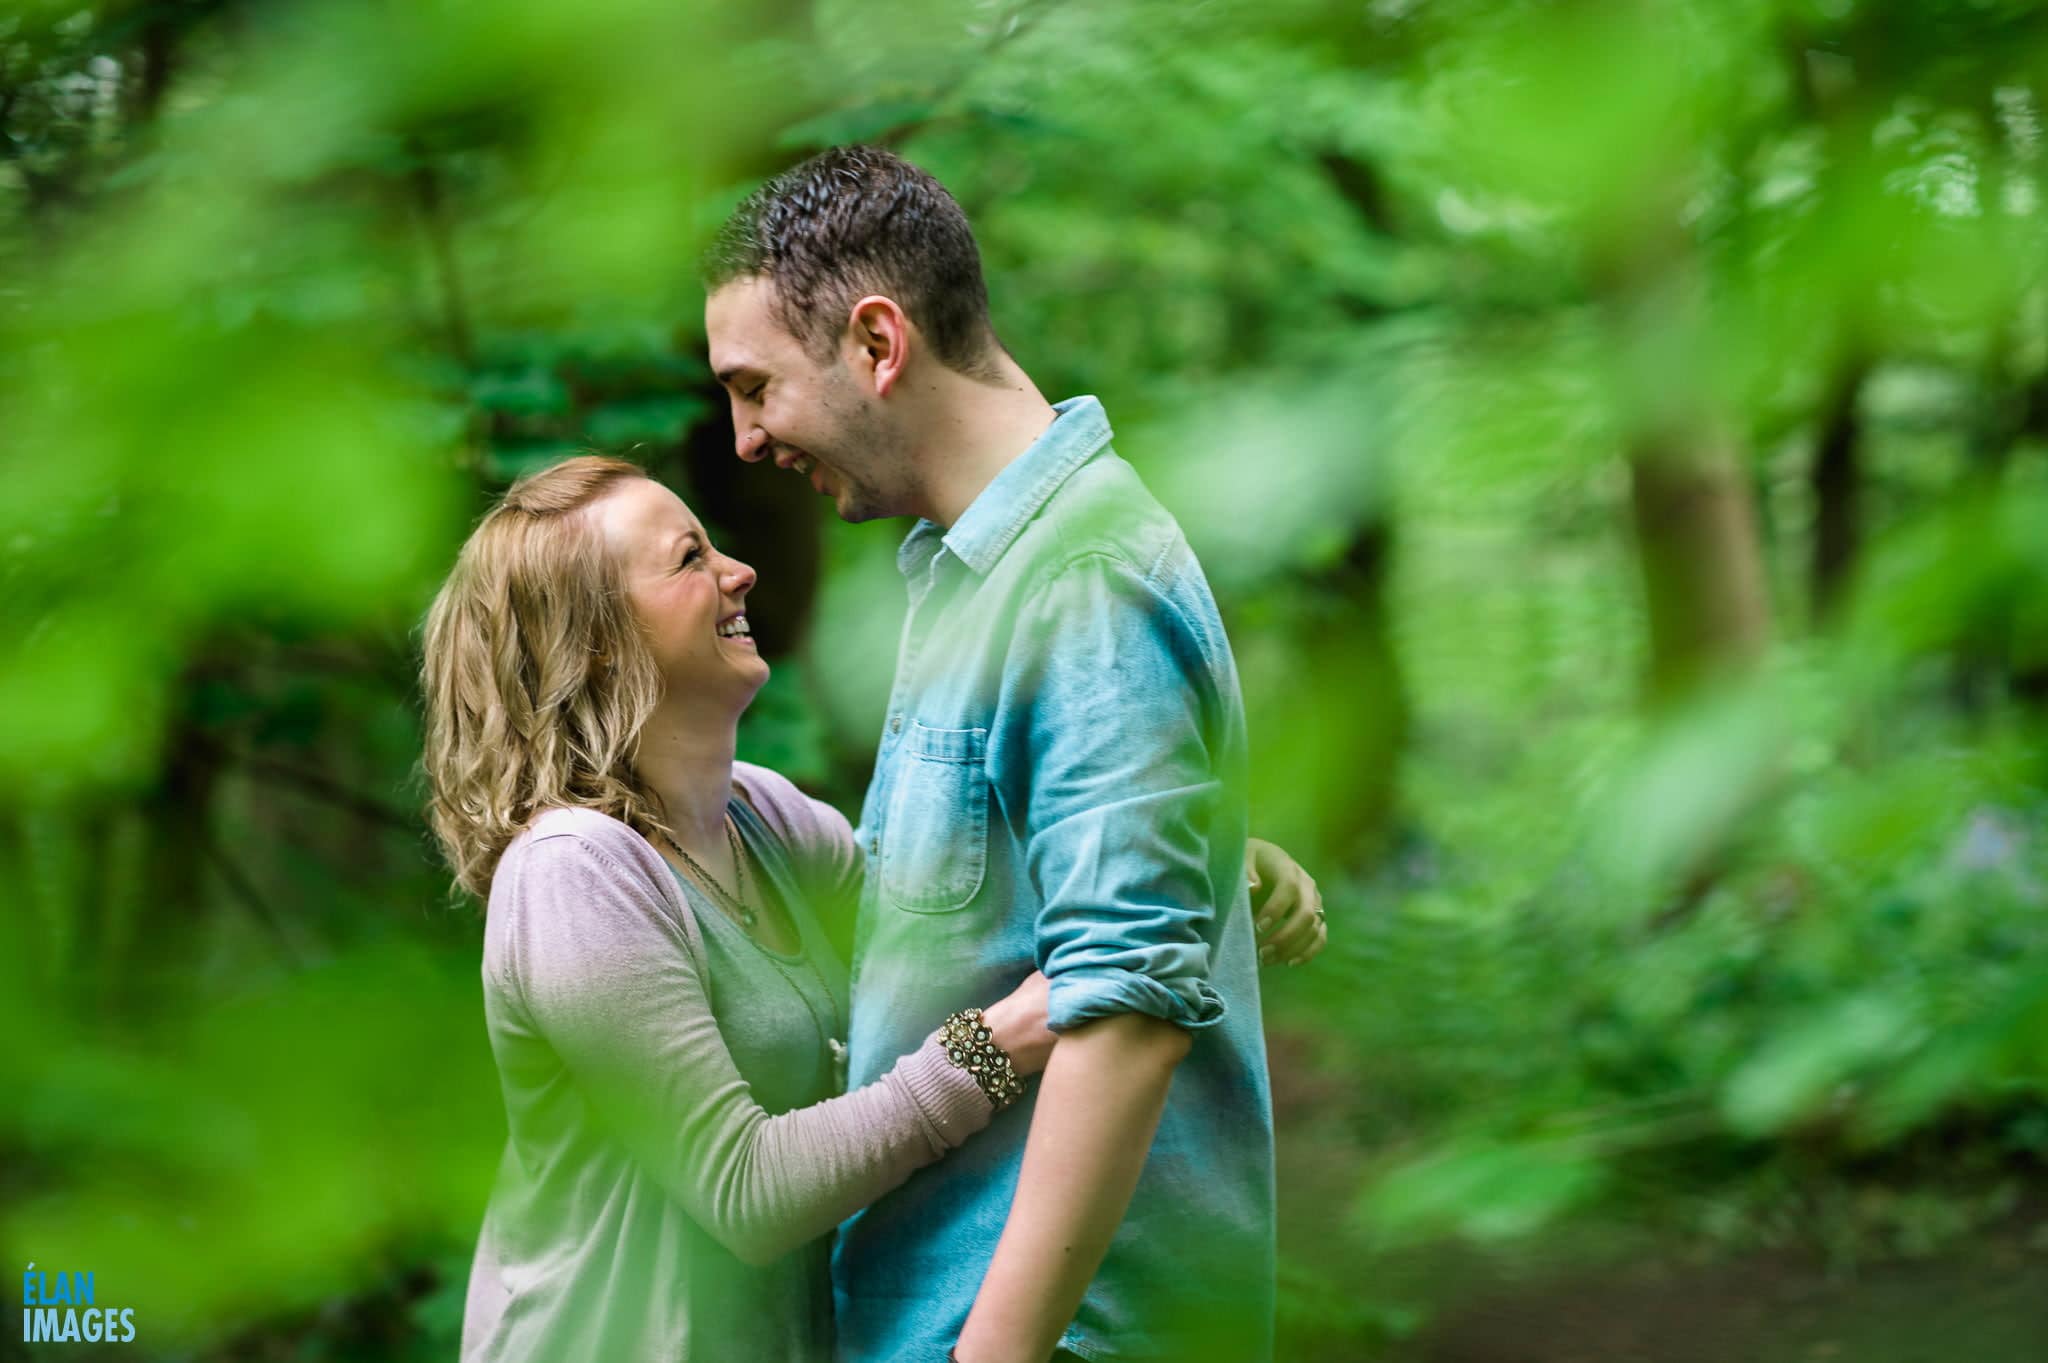 Engagement Photo Shoot in the Bluebell Woods near Bristol 11